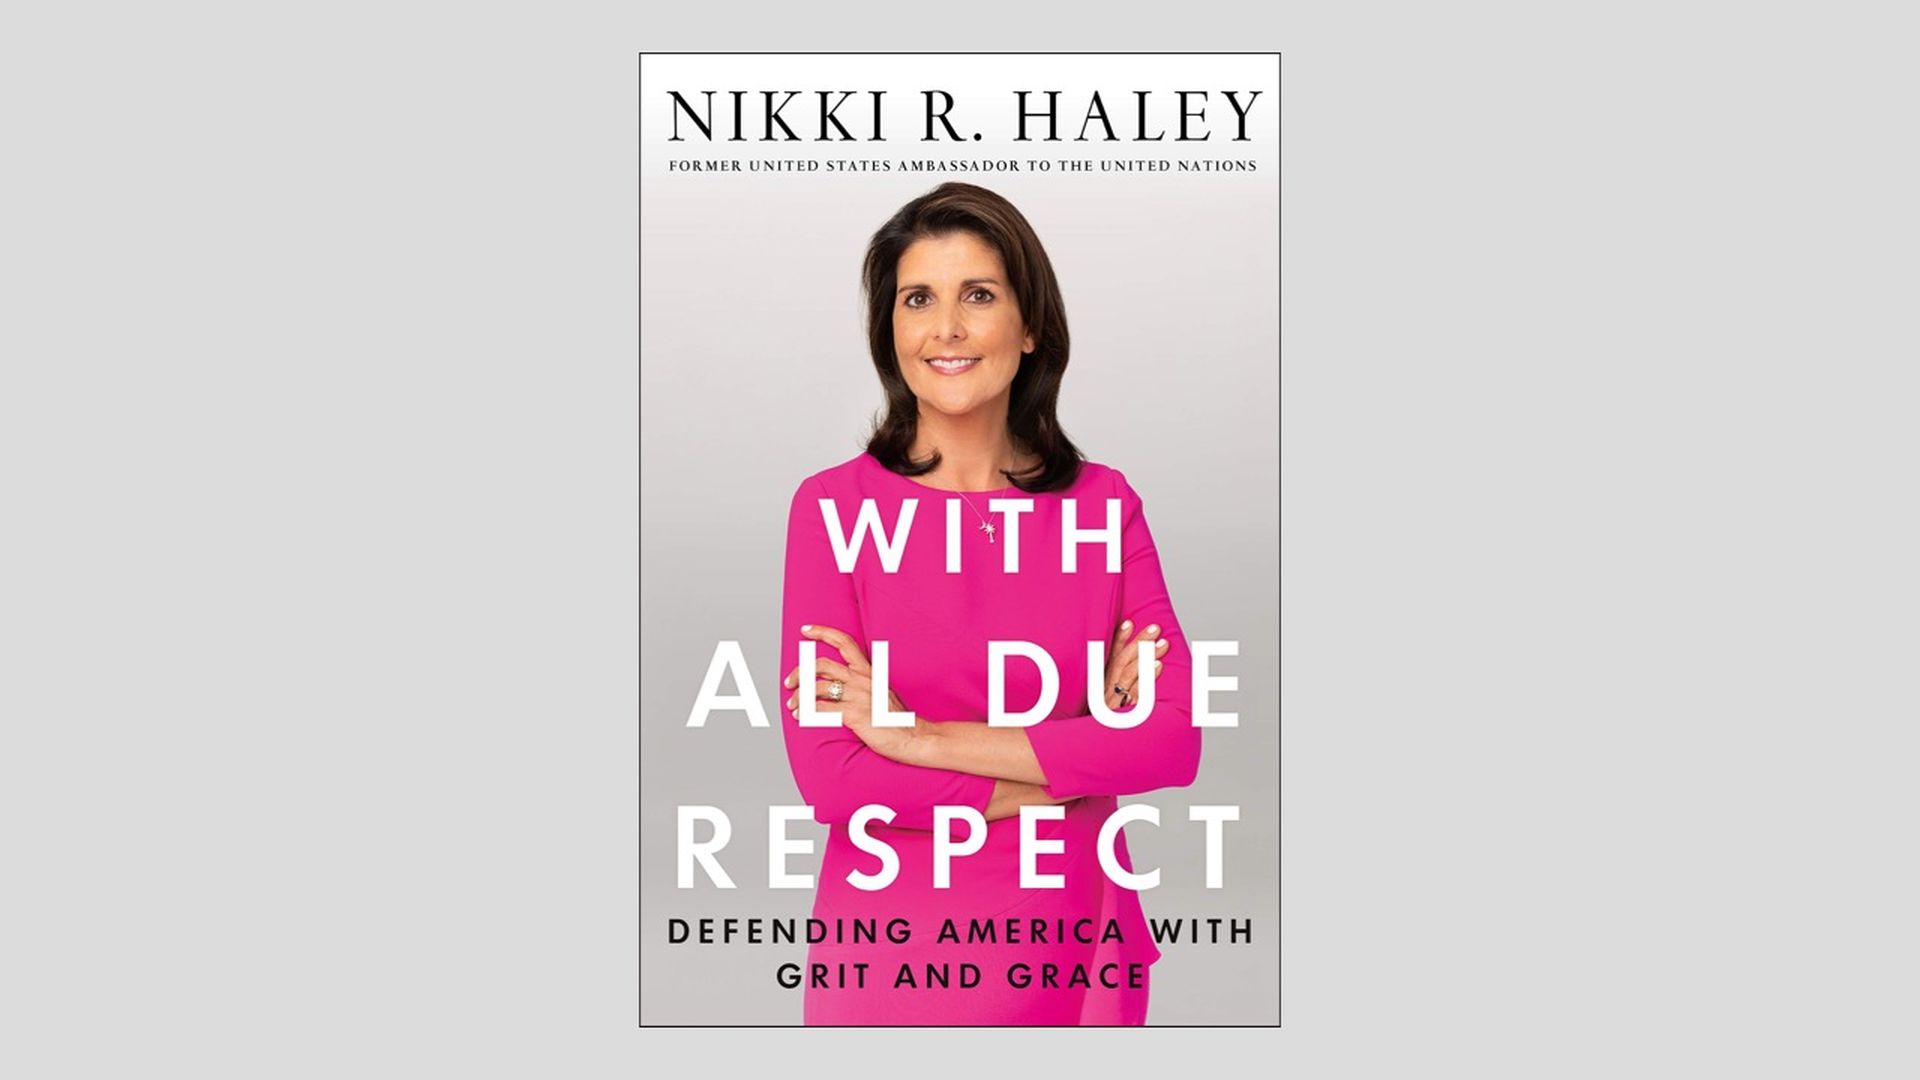 This is a cover photo of Nikki Haley's new book, "With All Due Respect"